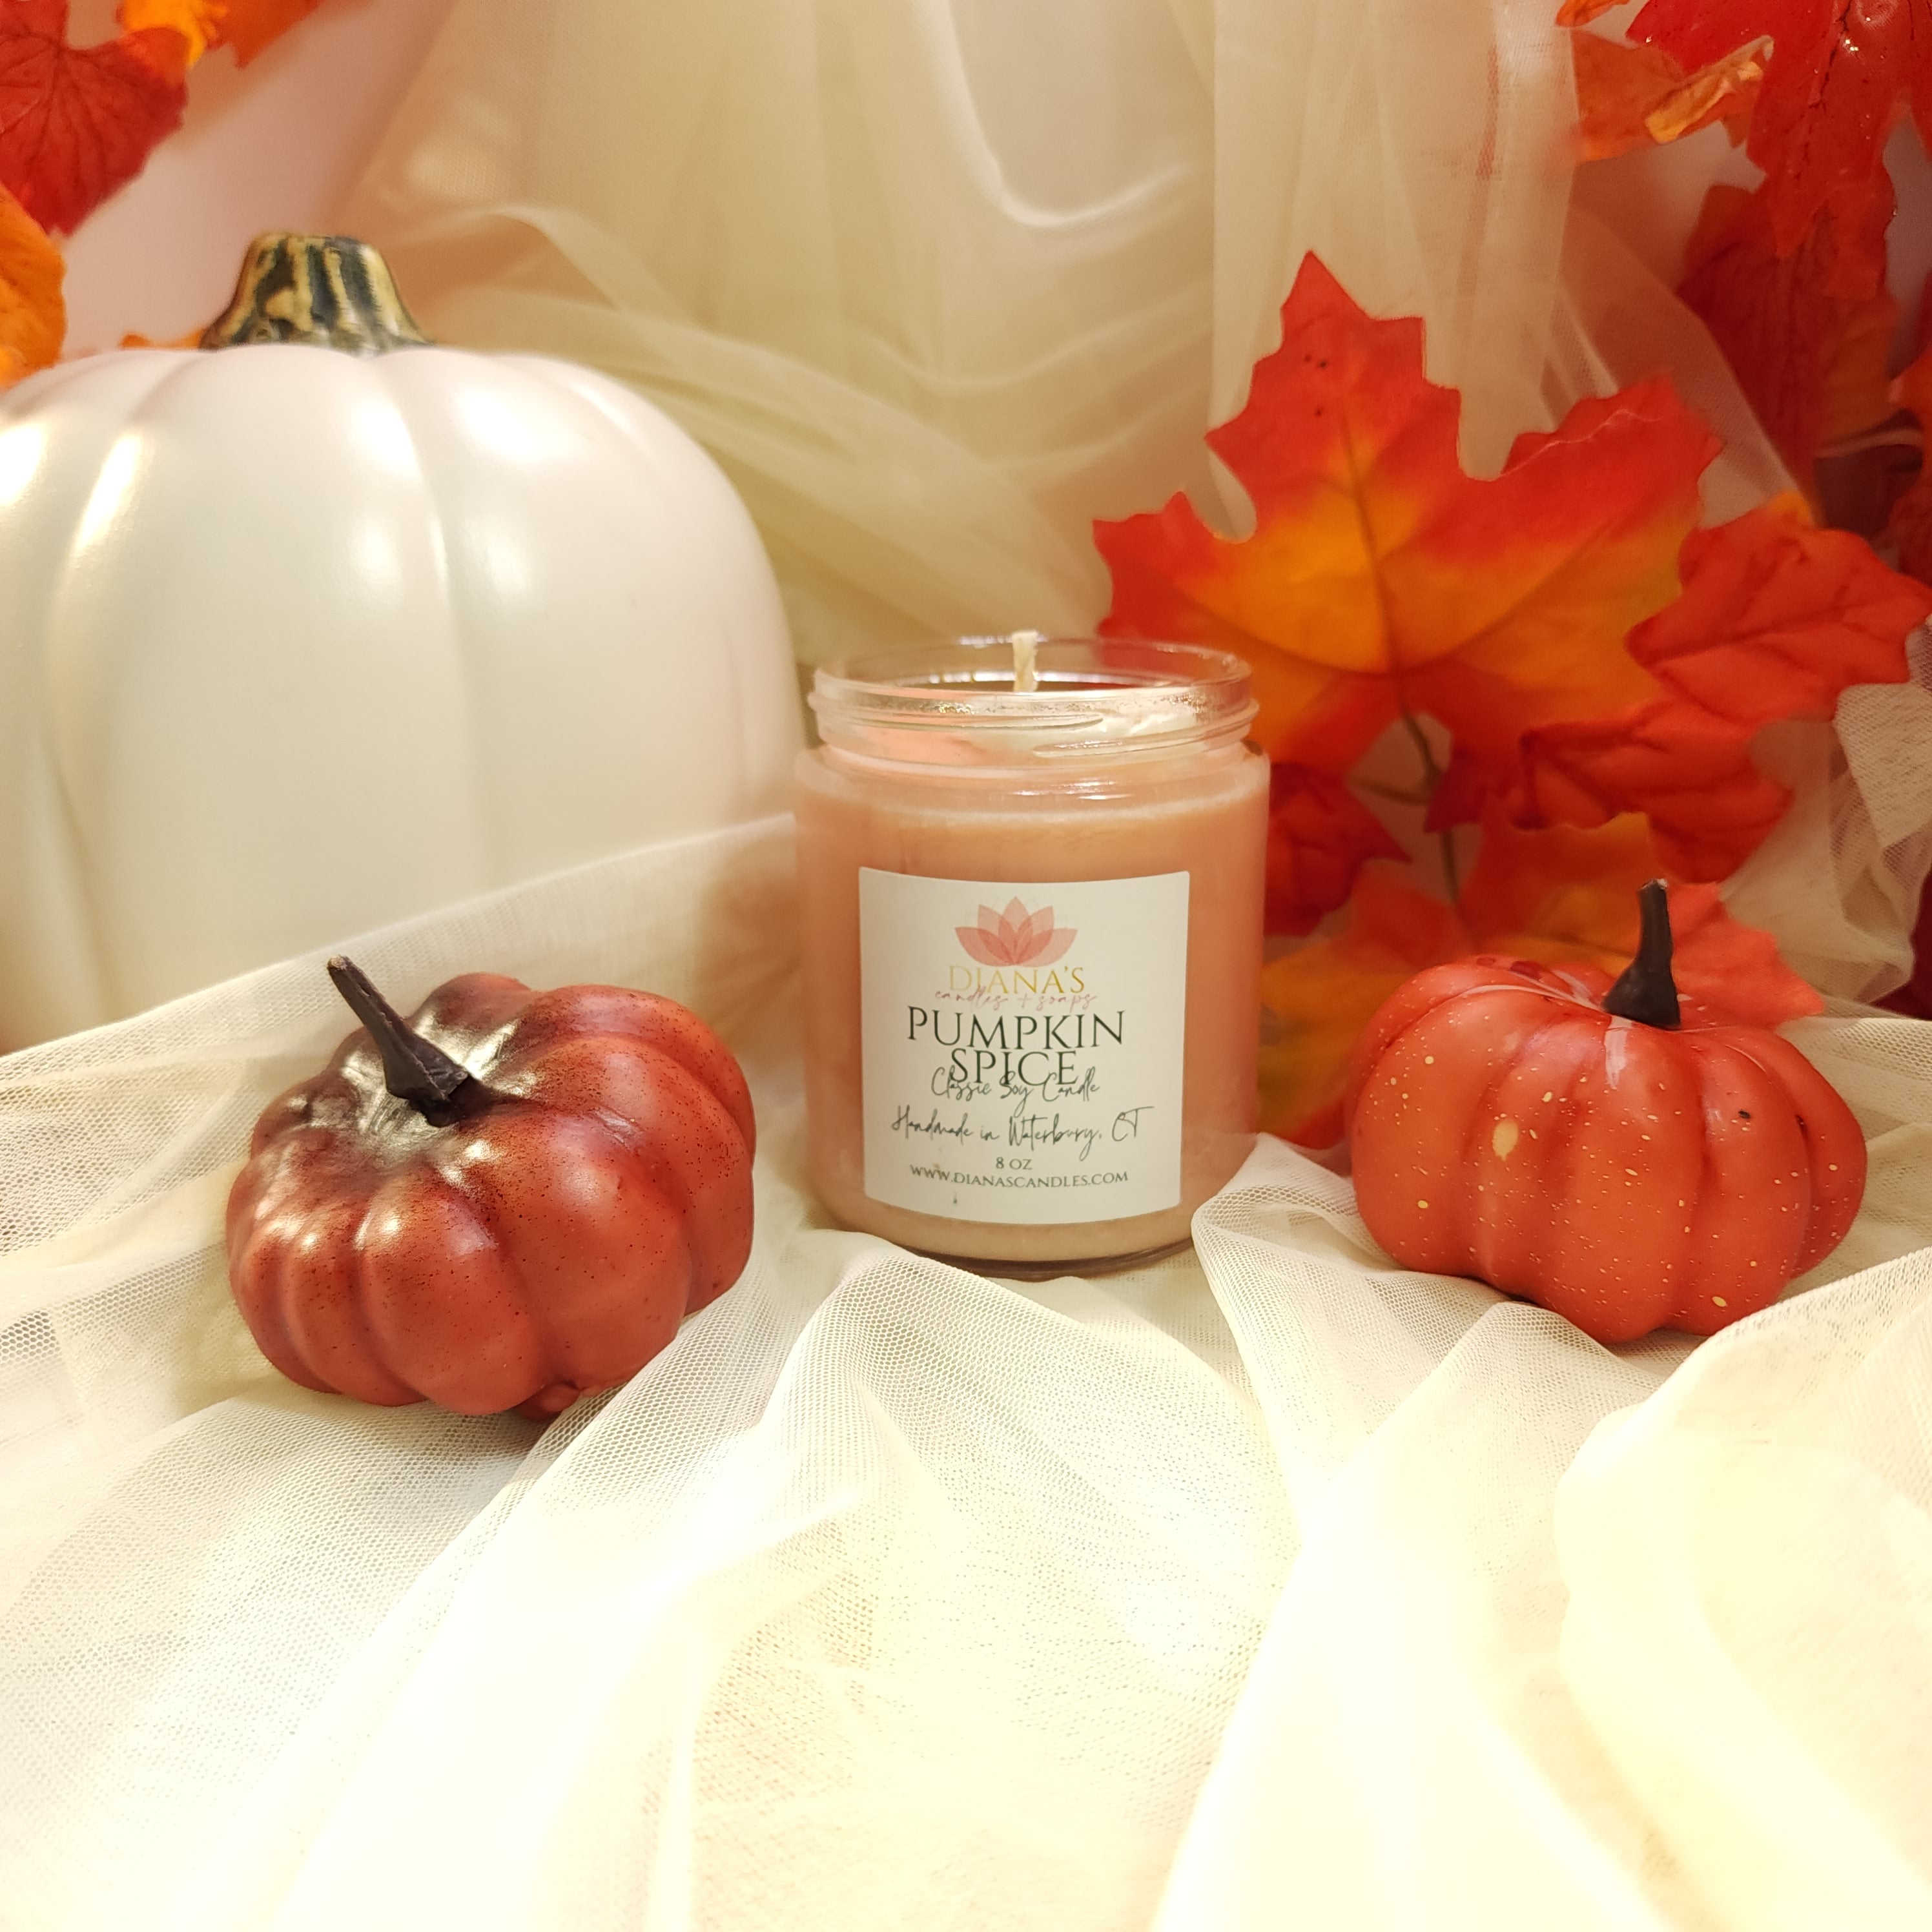 Pumpkin Spice Jar Candle Diana's Candles and Soaps 